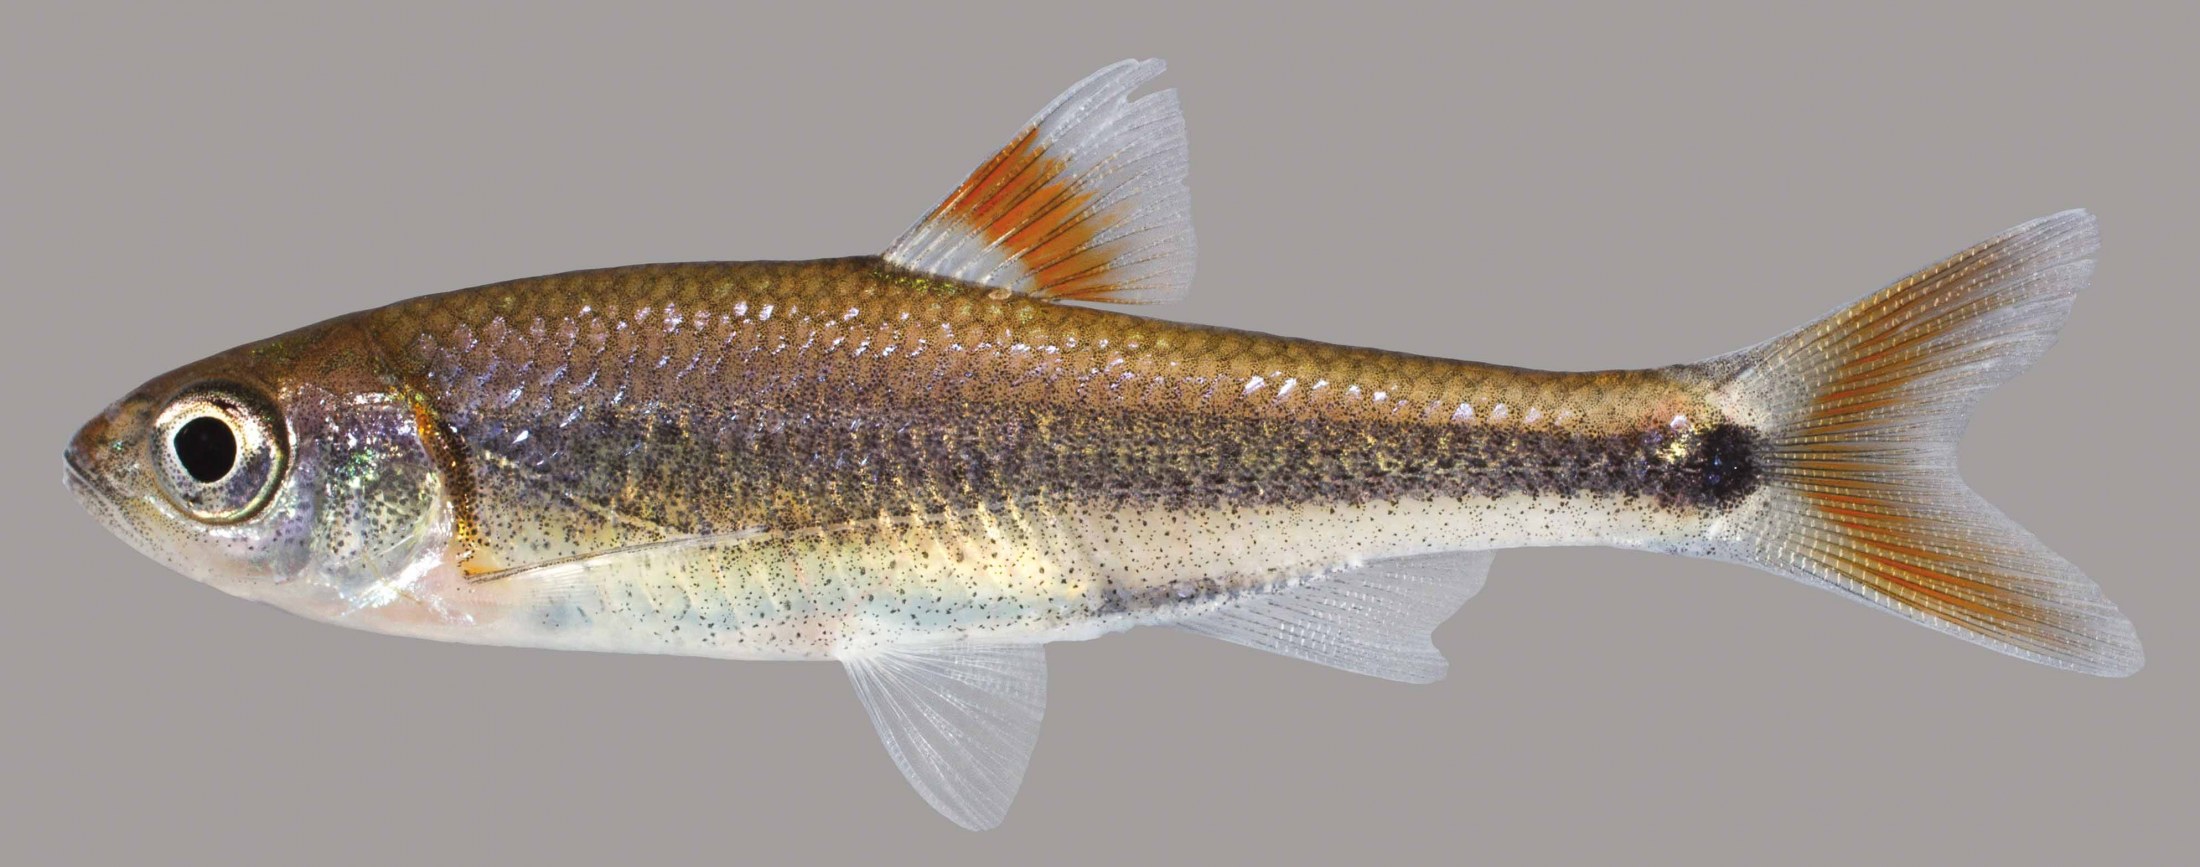 Bandfin Shiner – Discover Fishes